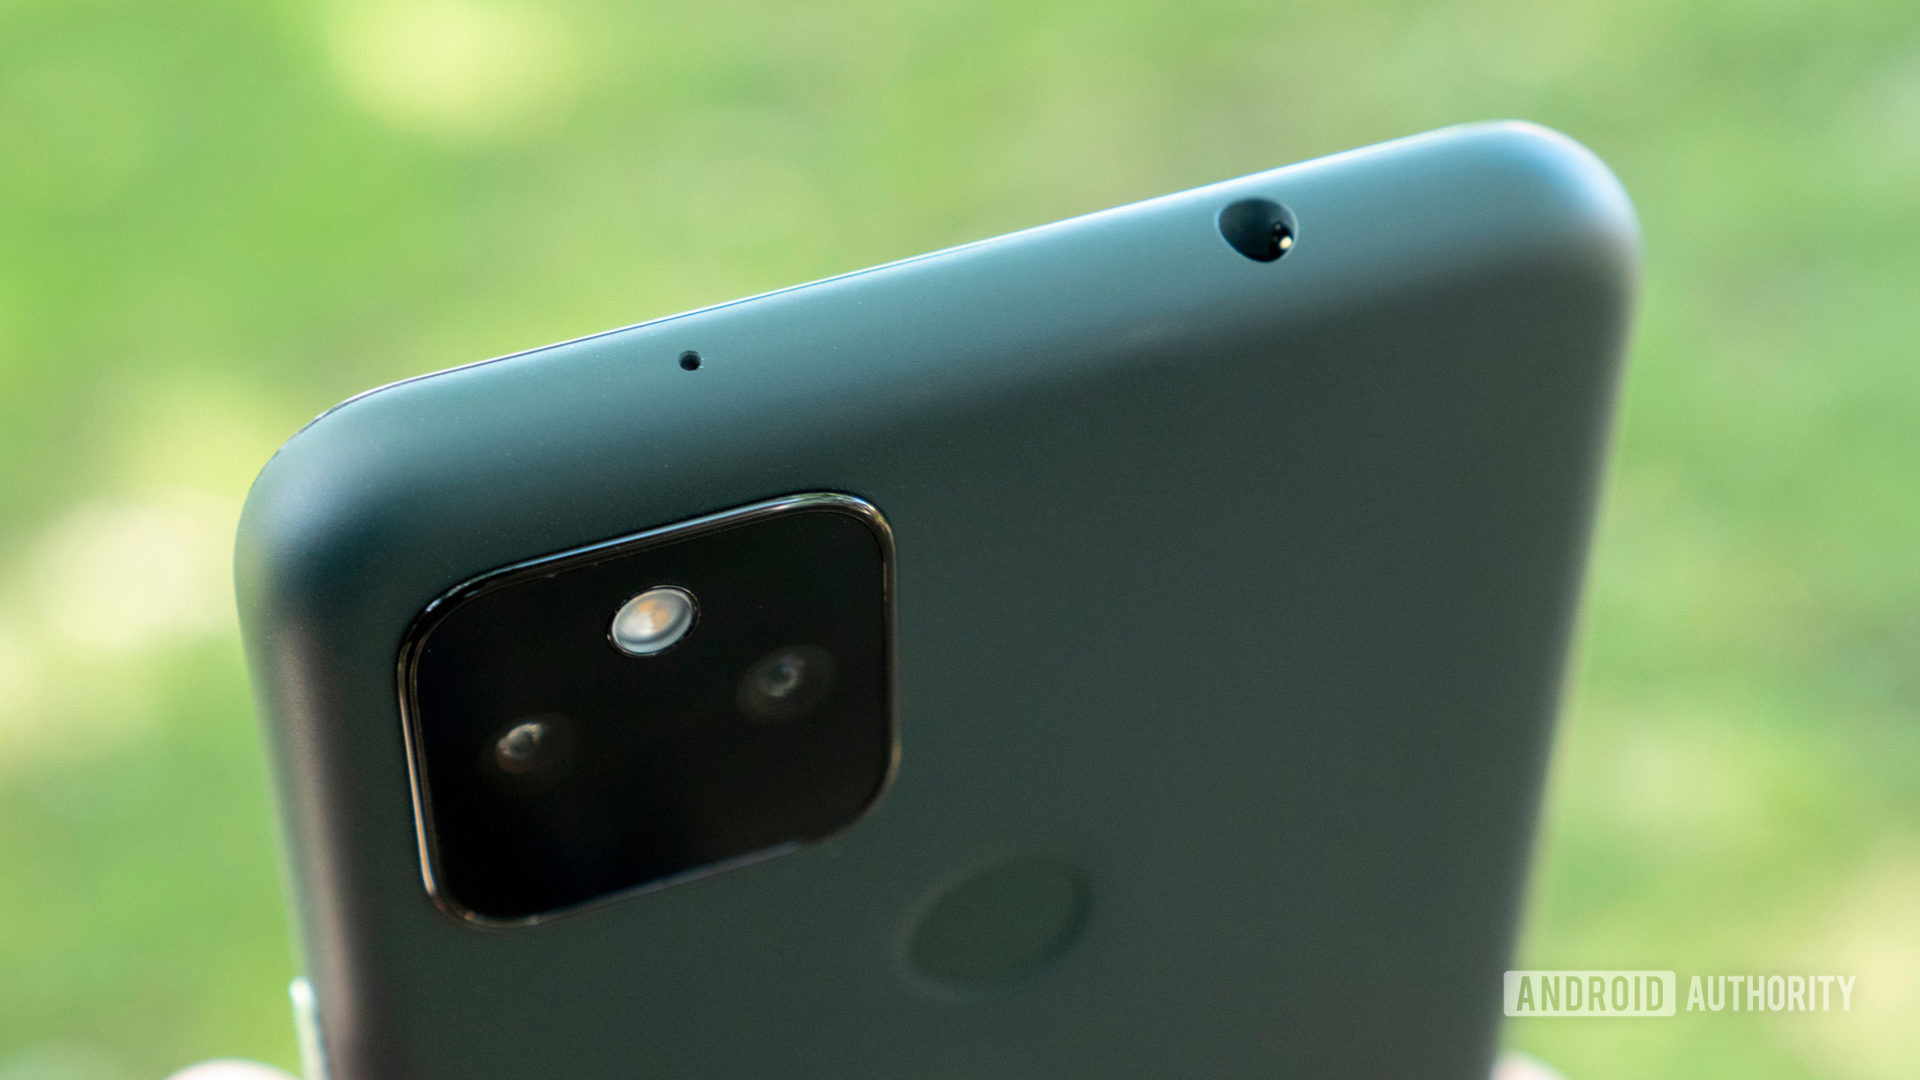 The Google Pixel 5a tilted showing the camera module and headphone jack.